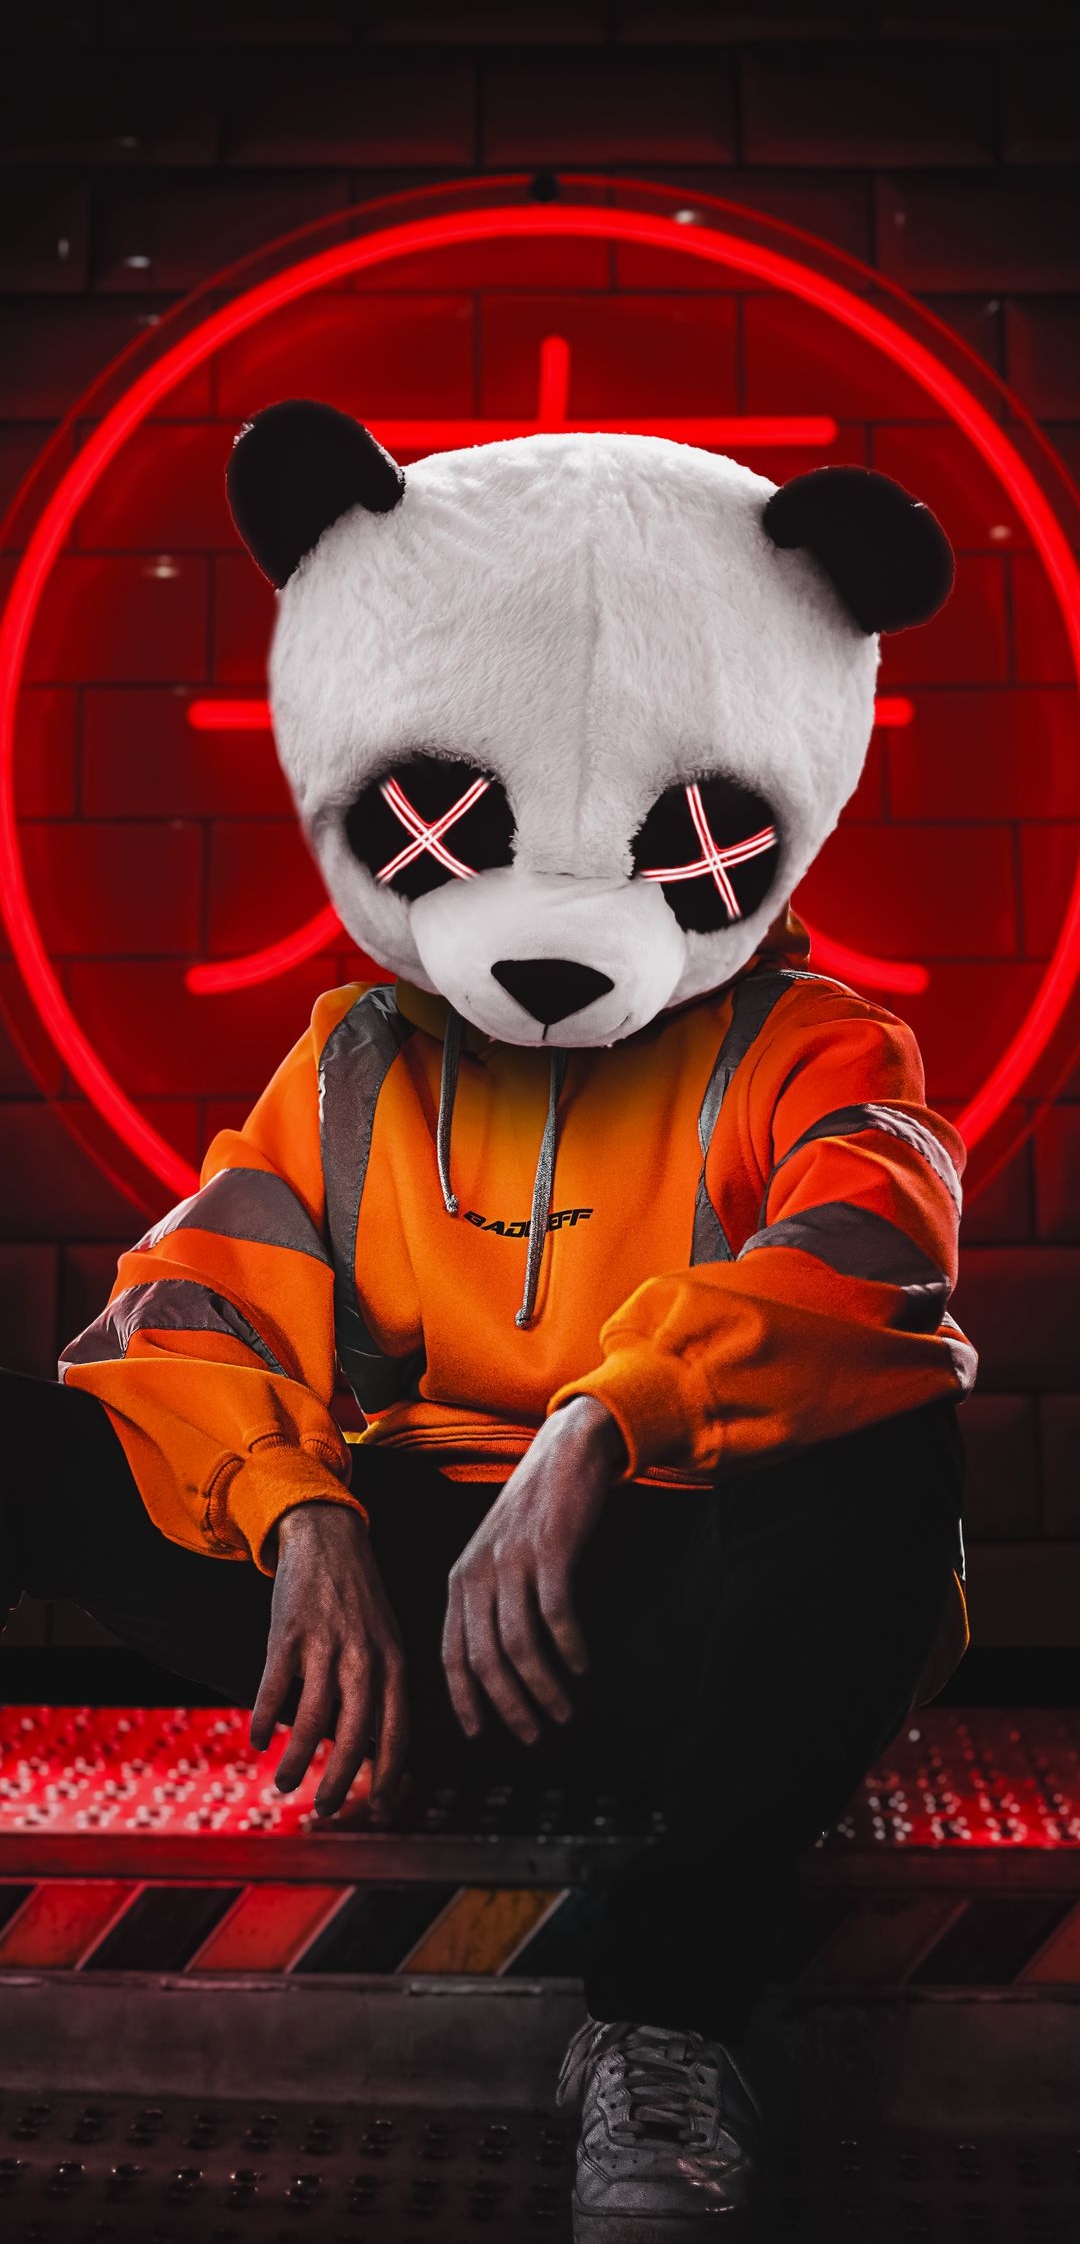 Panda_Actor_others_HD